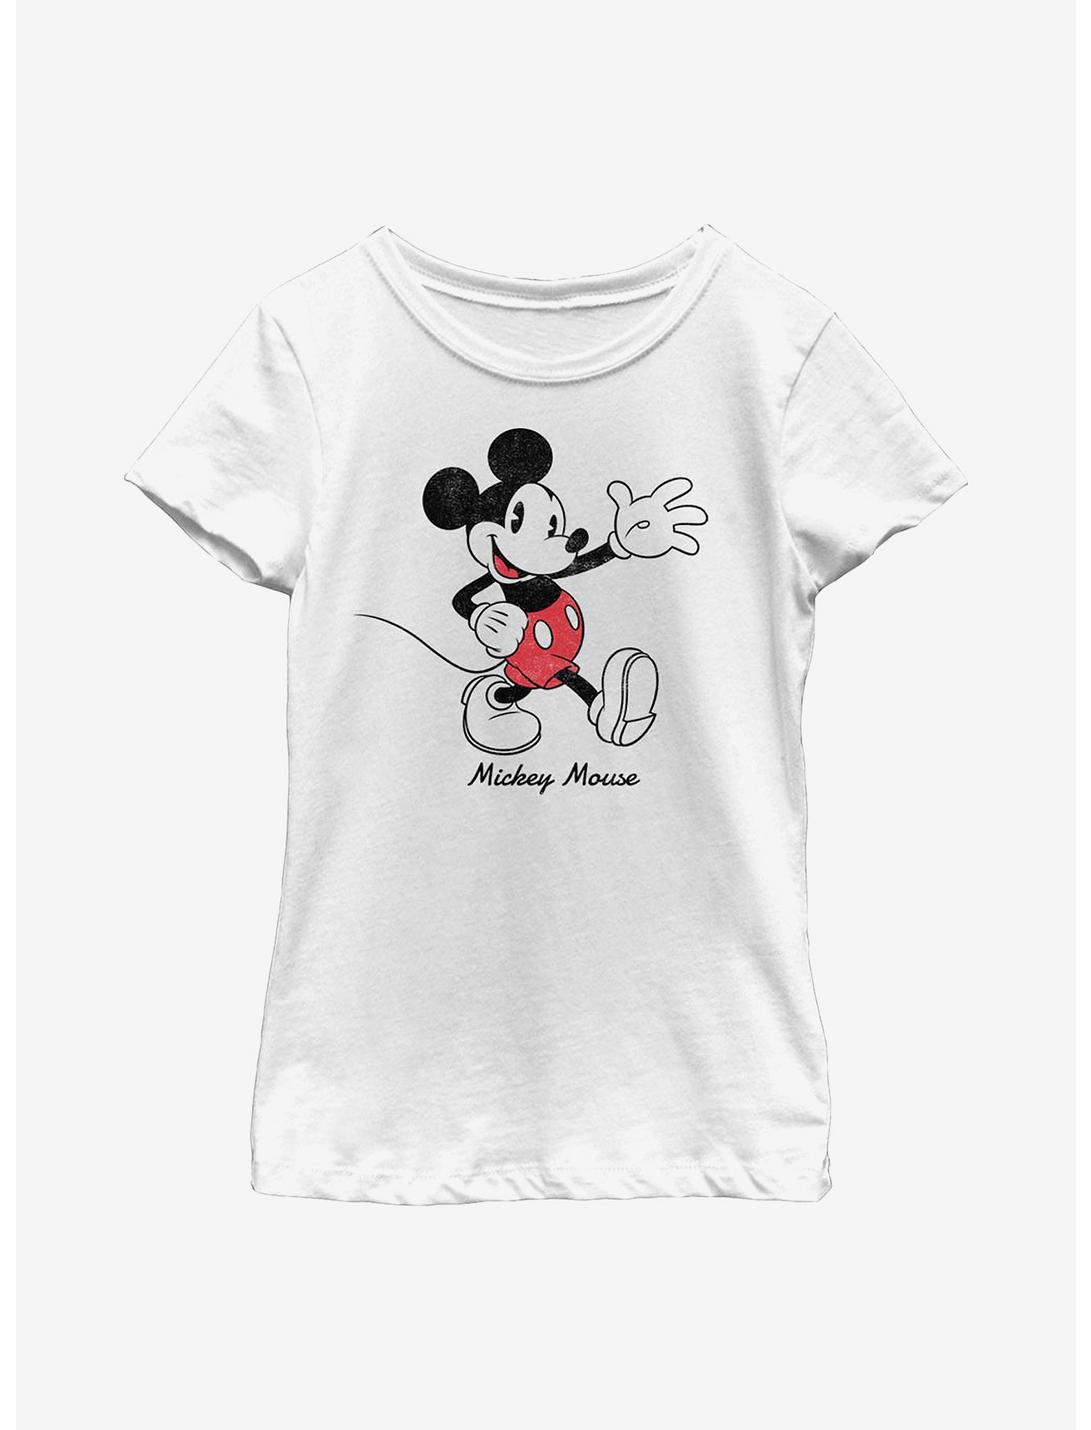 Disney Mickey Mouse Vintage Sketch Youth Girls T-Shirt, WHITE, hi-res